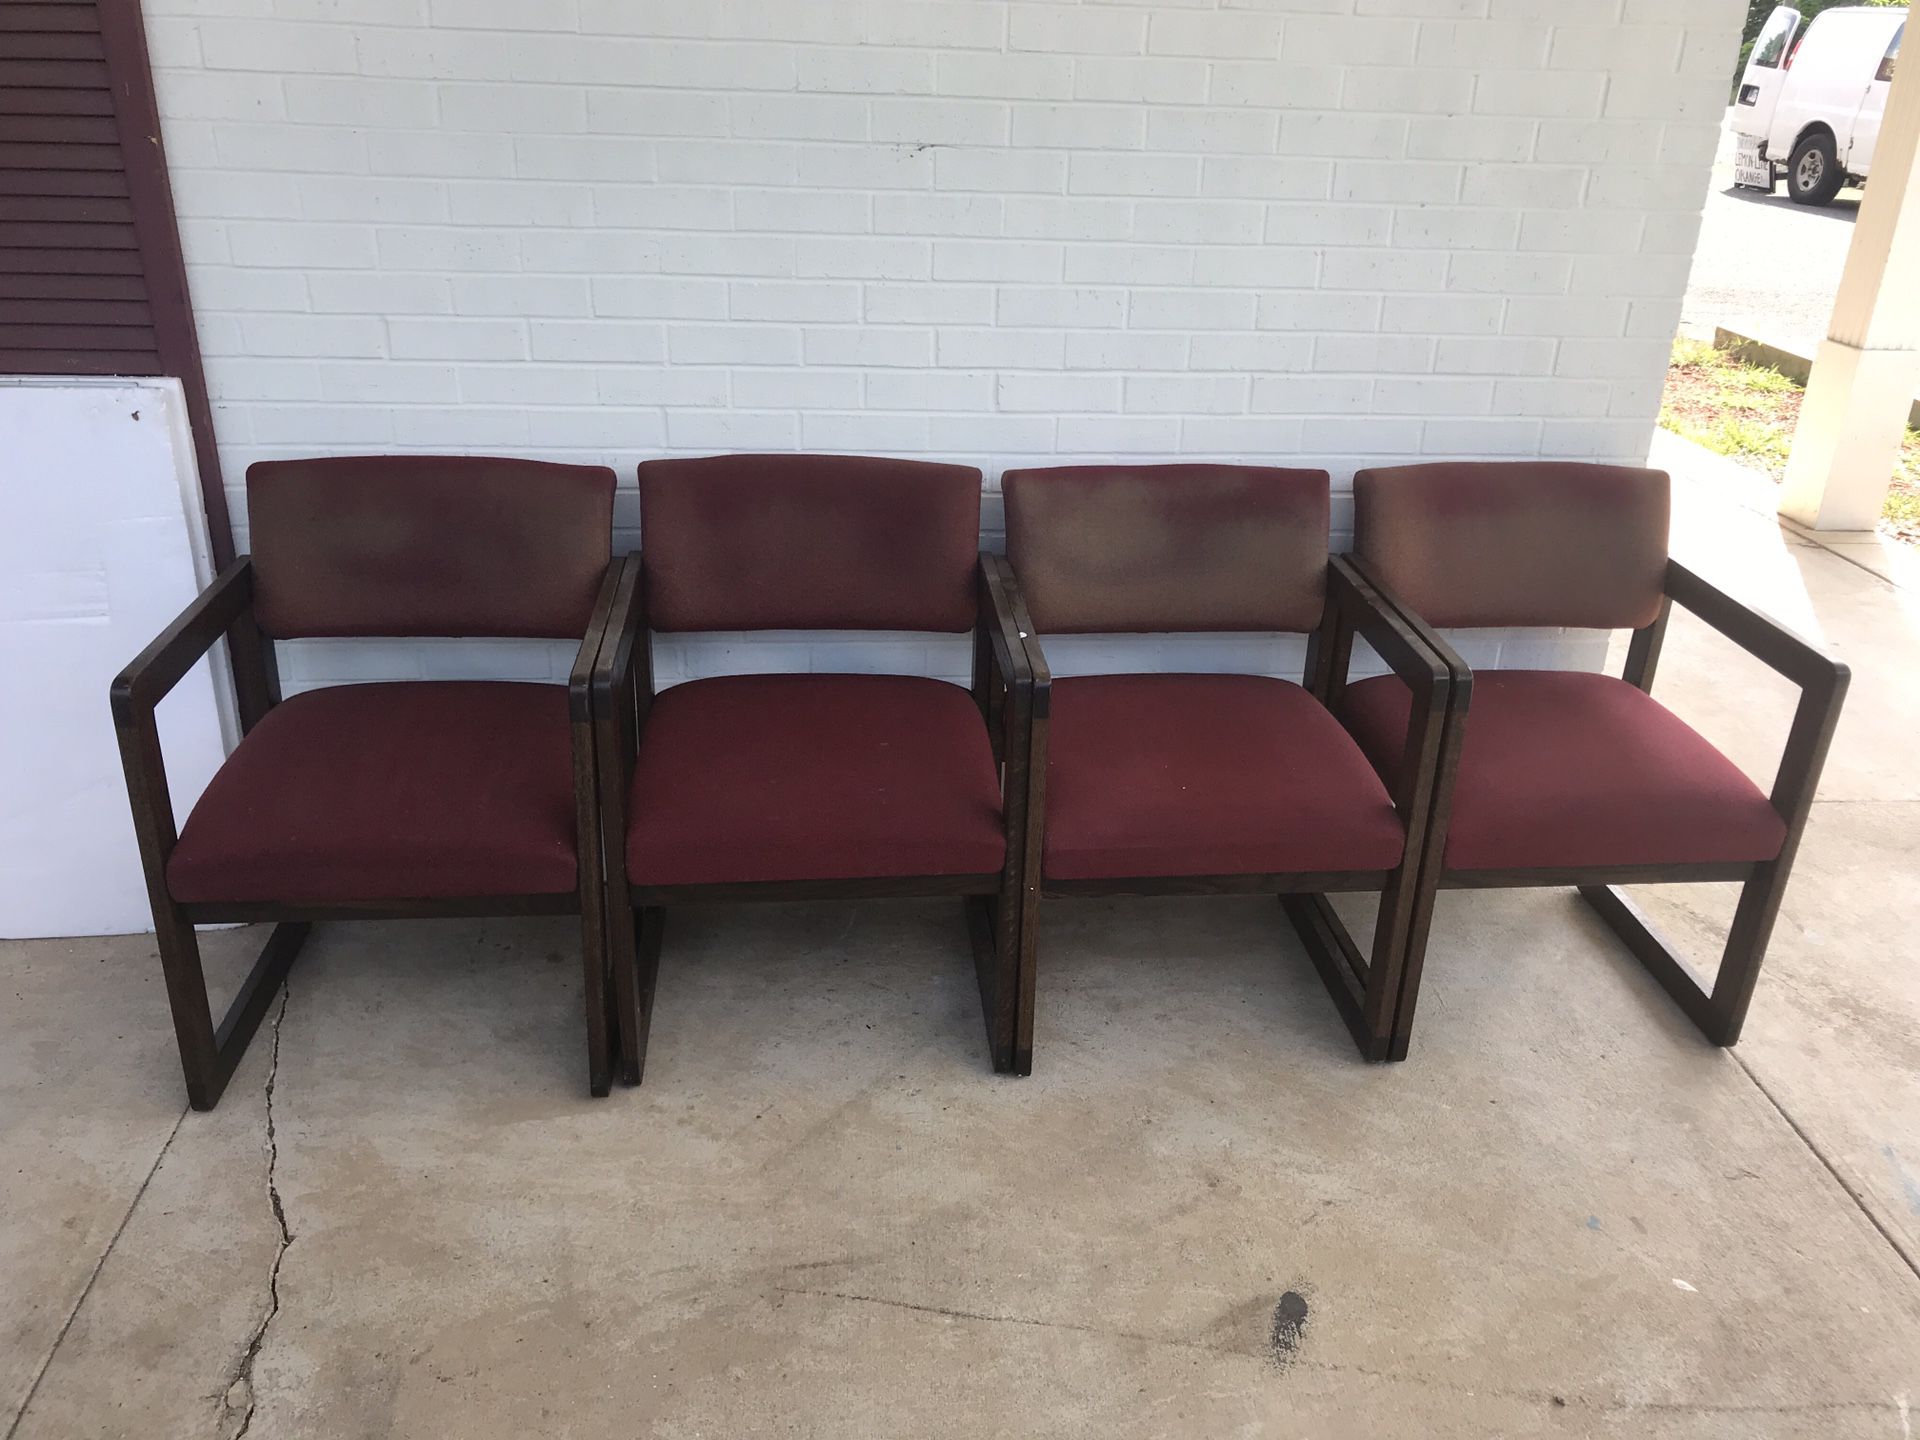 Four free free chairs